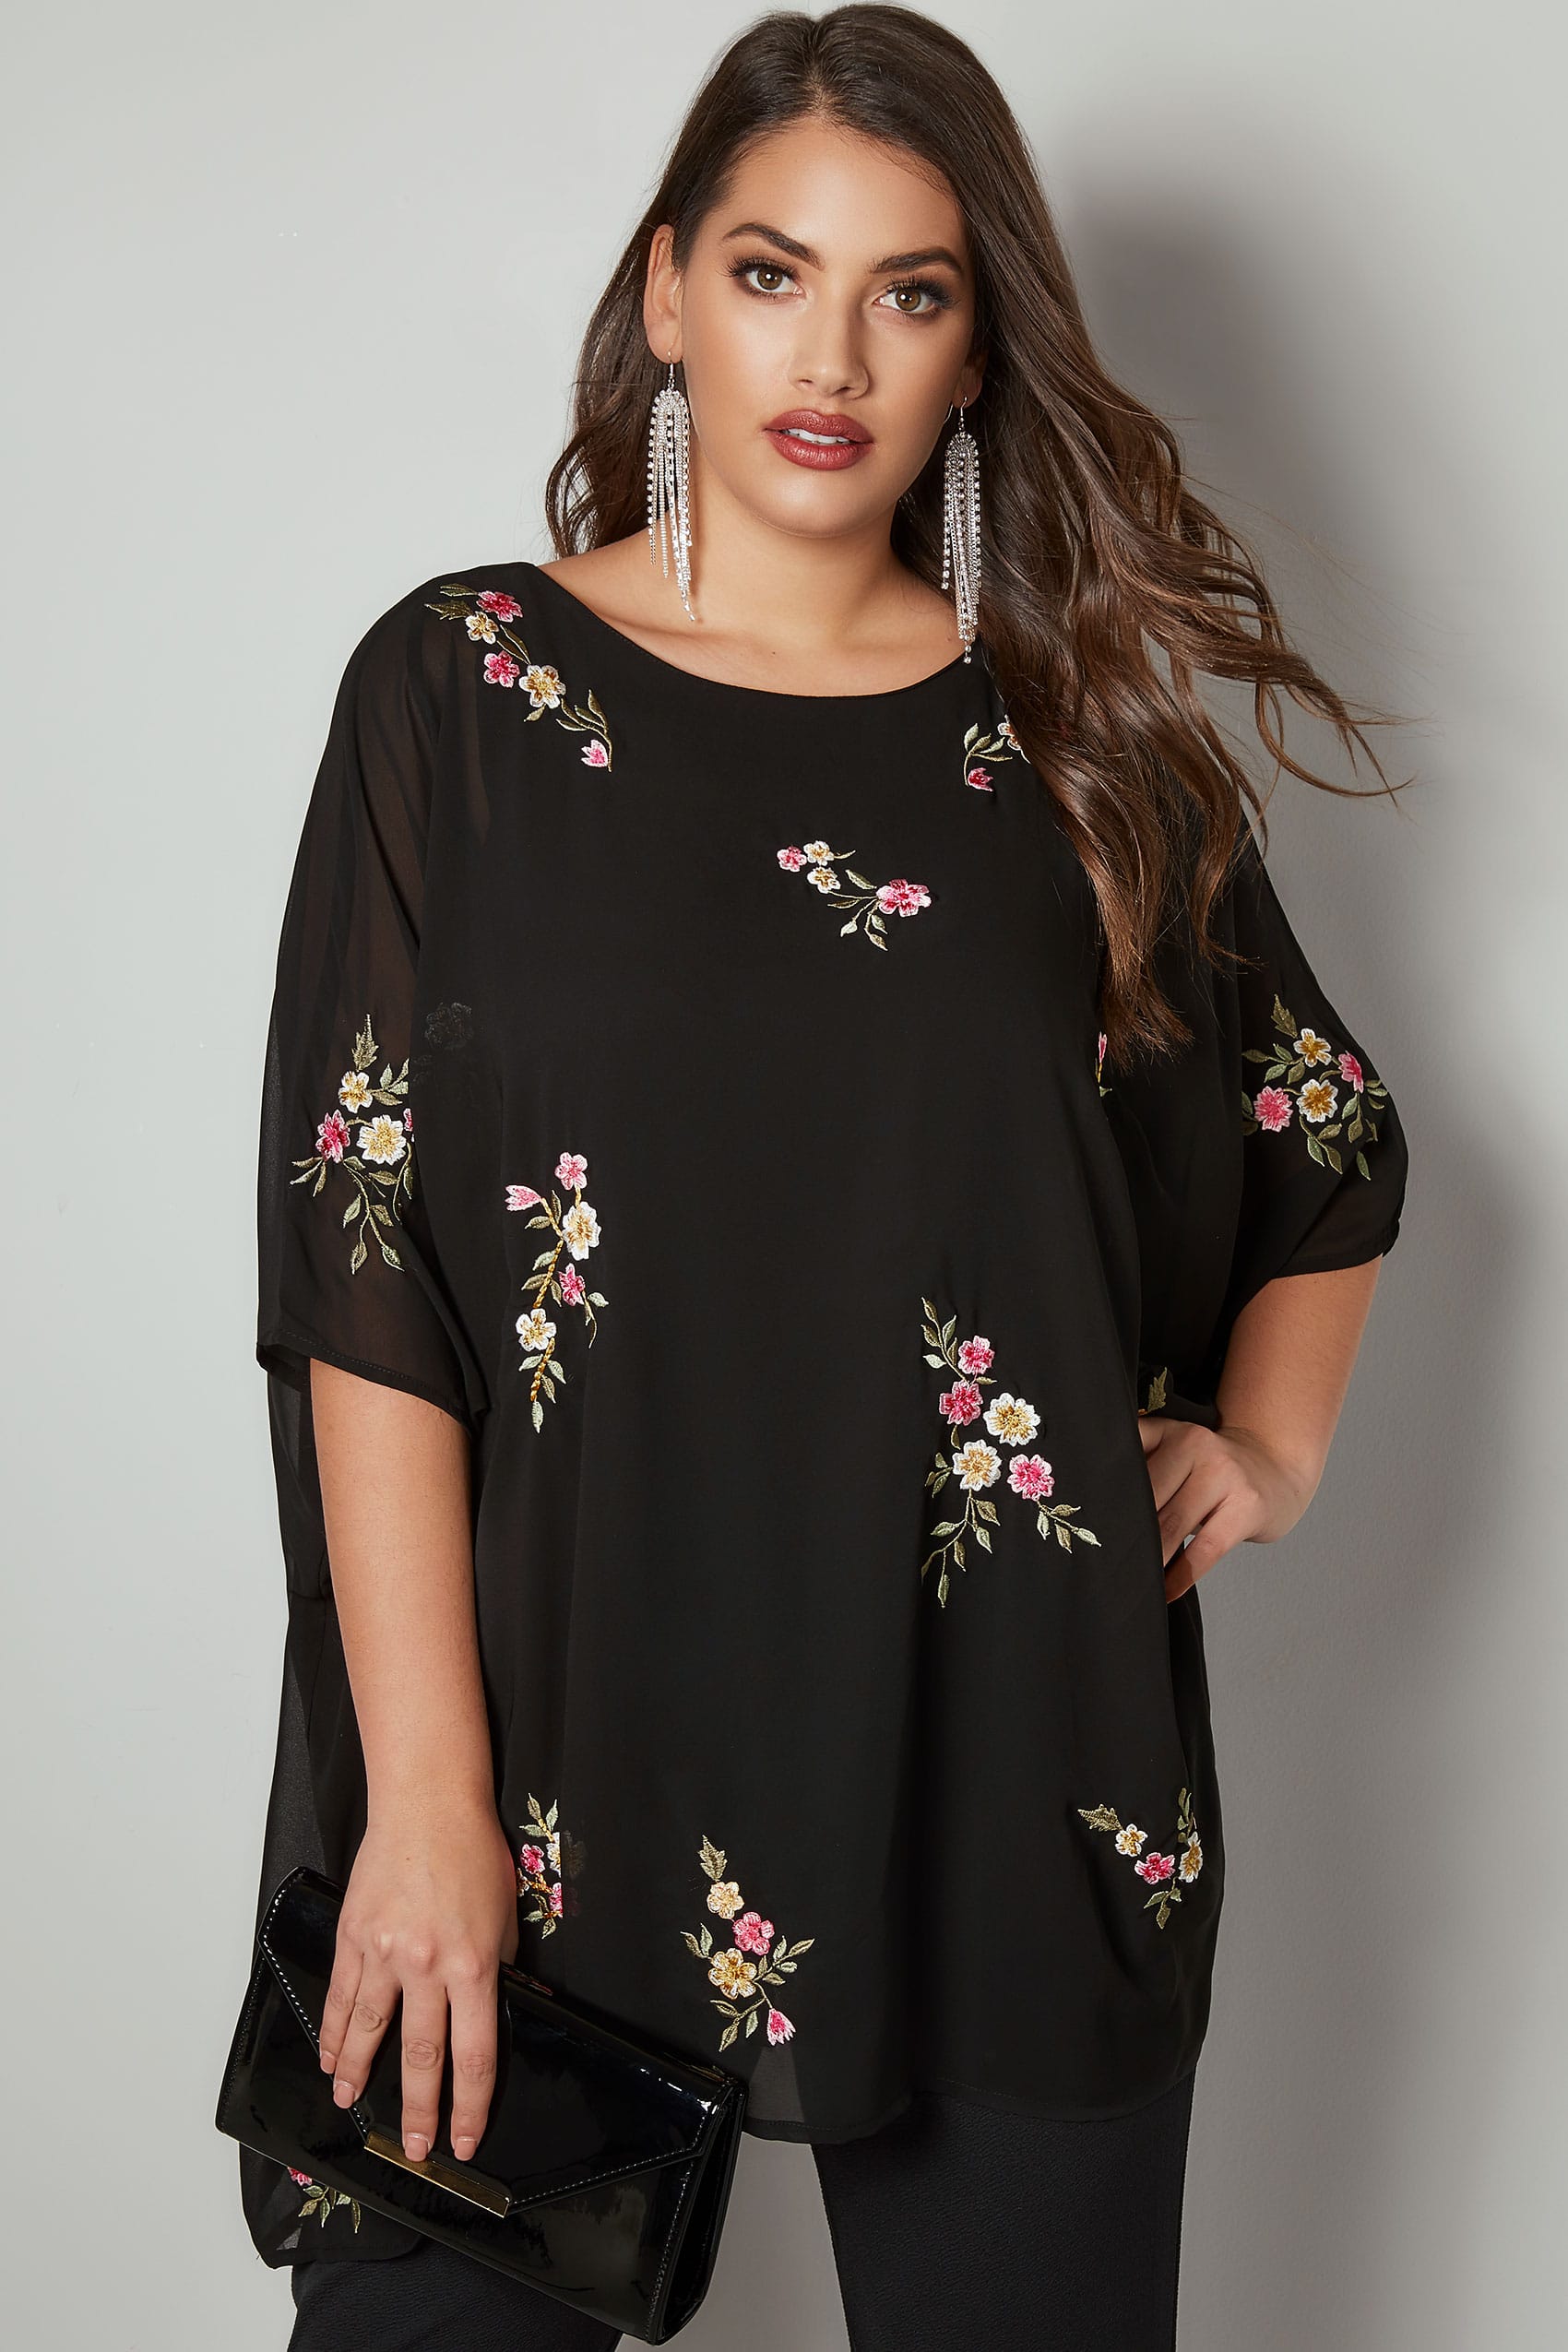 Yours London Black Floral Embroidered Chiffon Cape Top